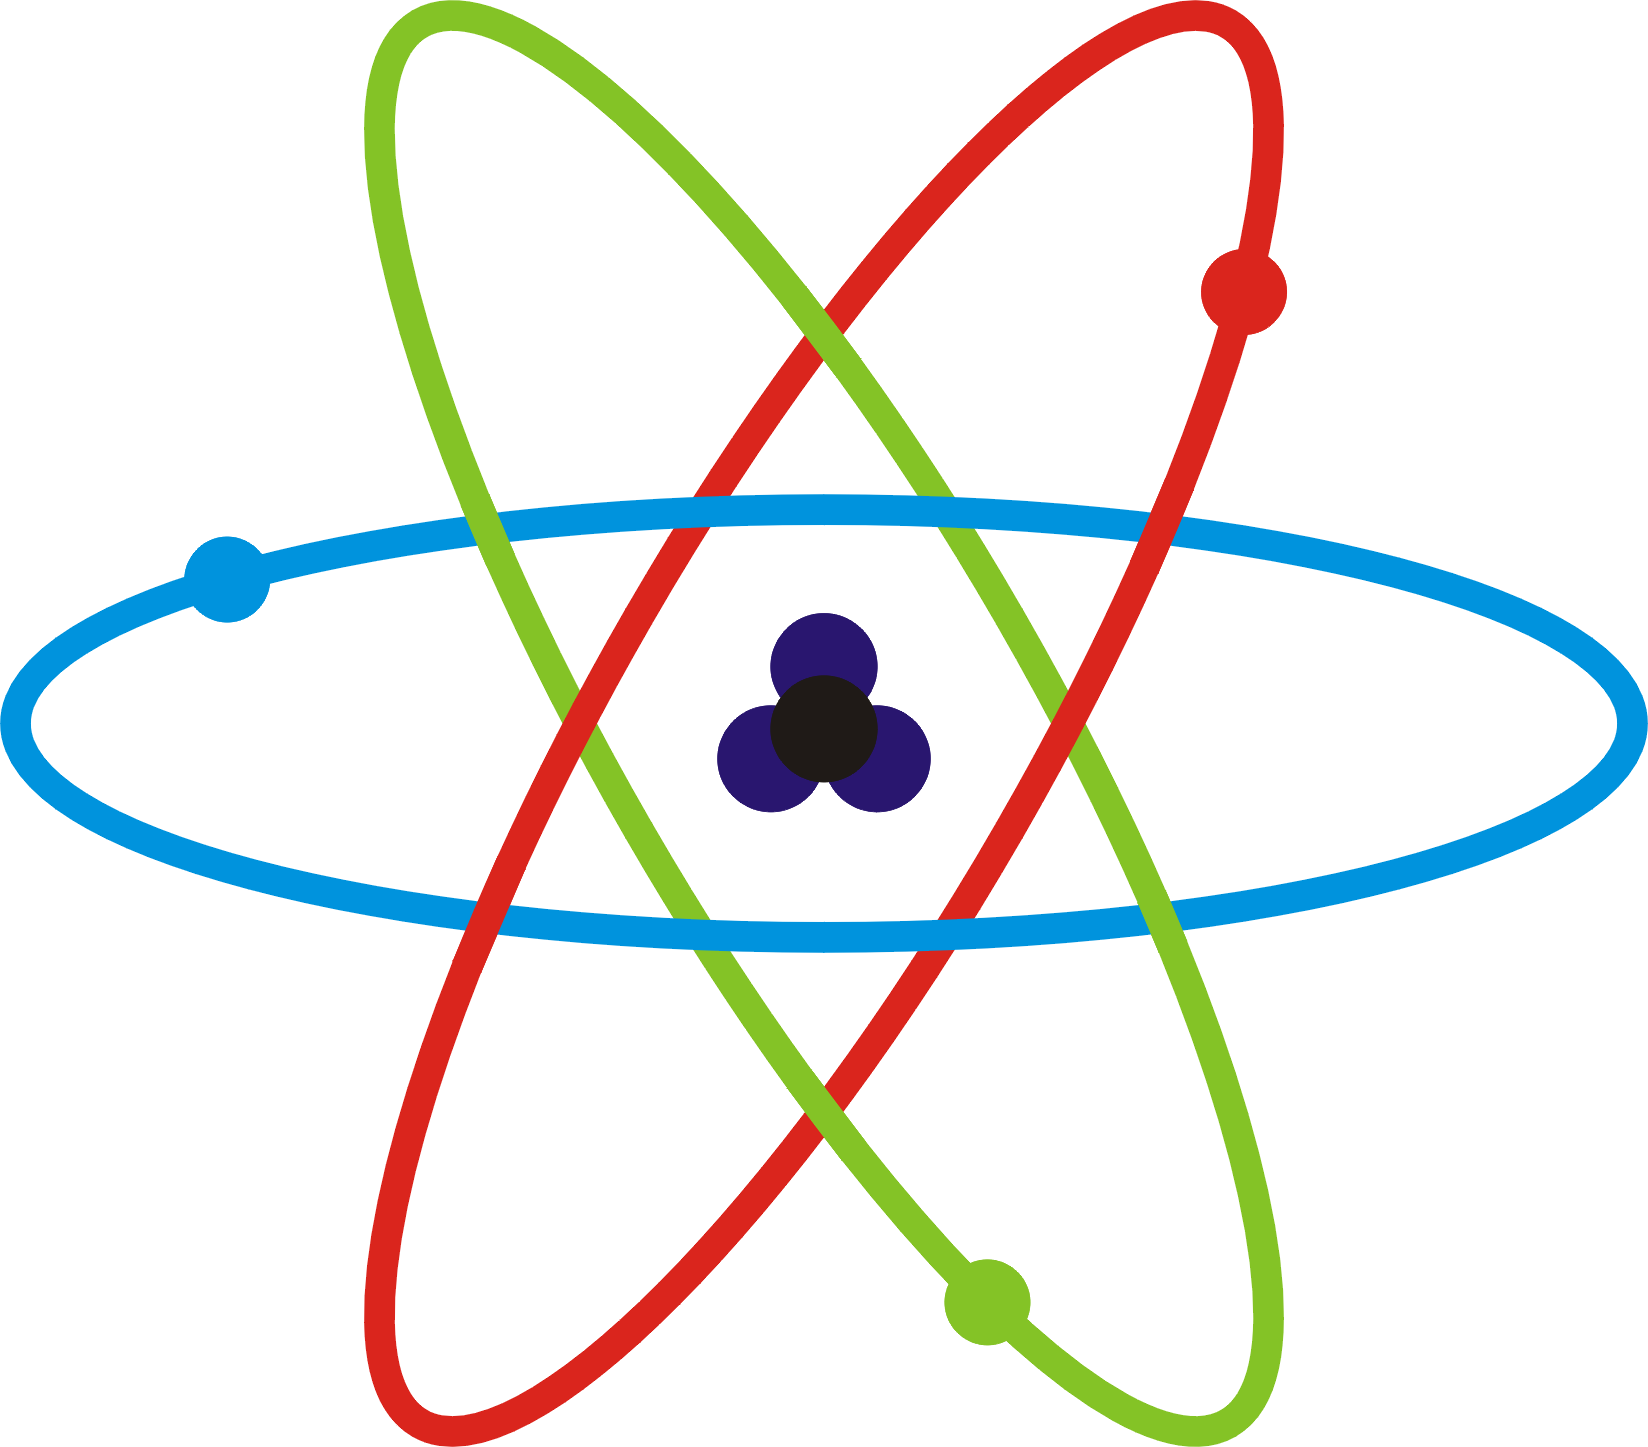 File:Schematicky atom.png - Wikimedia Commons